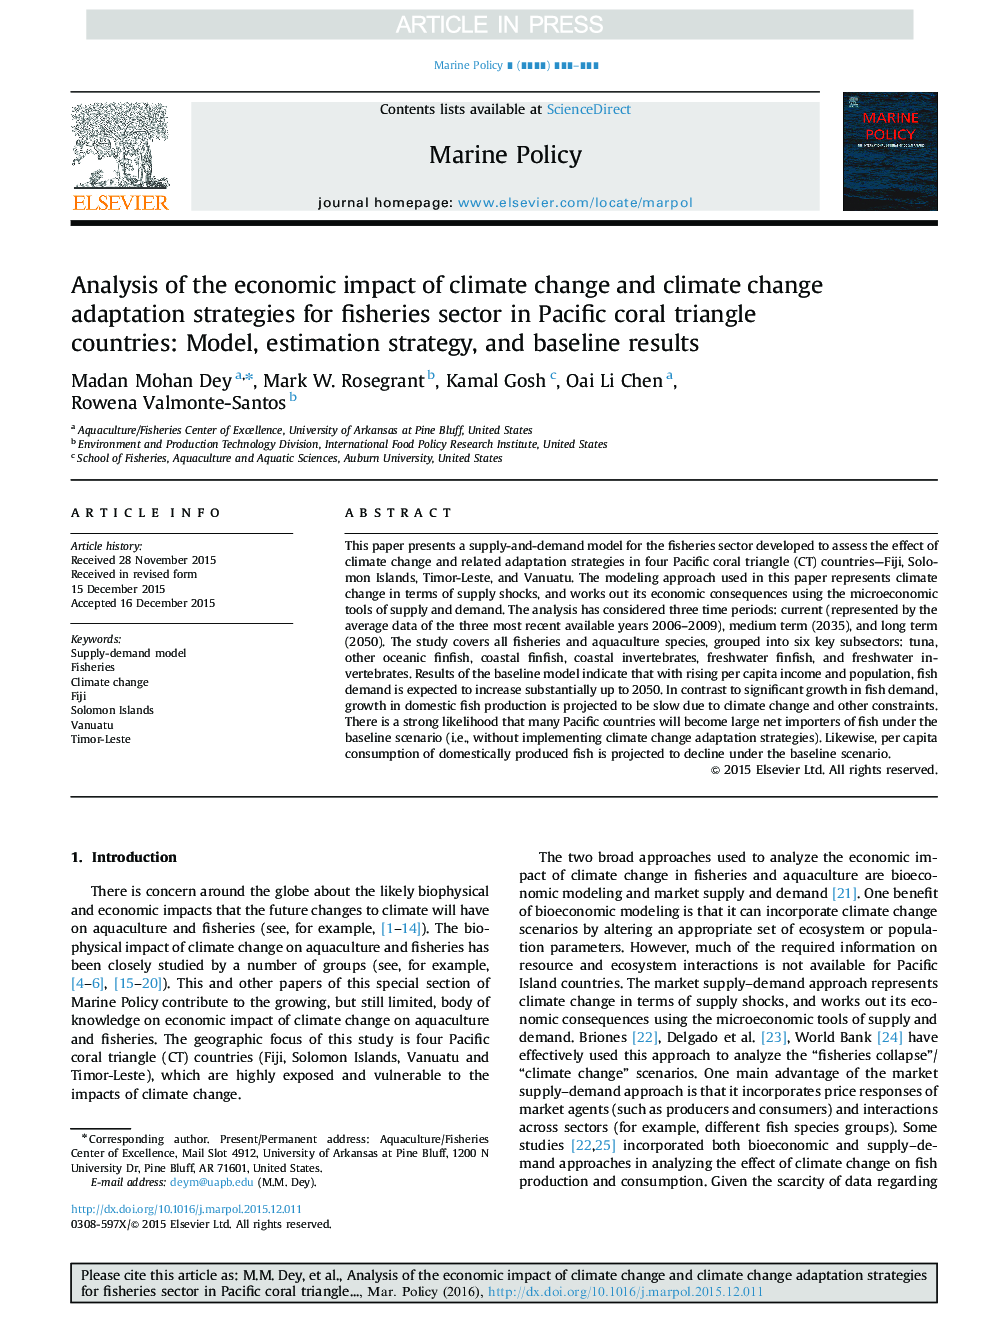 Analysis of the economic impact of climate change and climate change adaptation strategies for fisheries sector in Pacific coral triangle countries: Model, estimation strategy, and baseline results